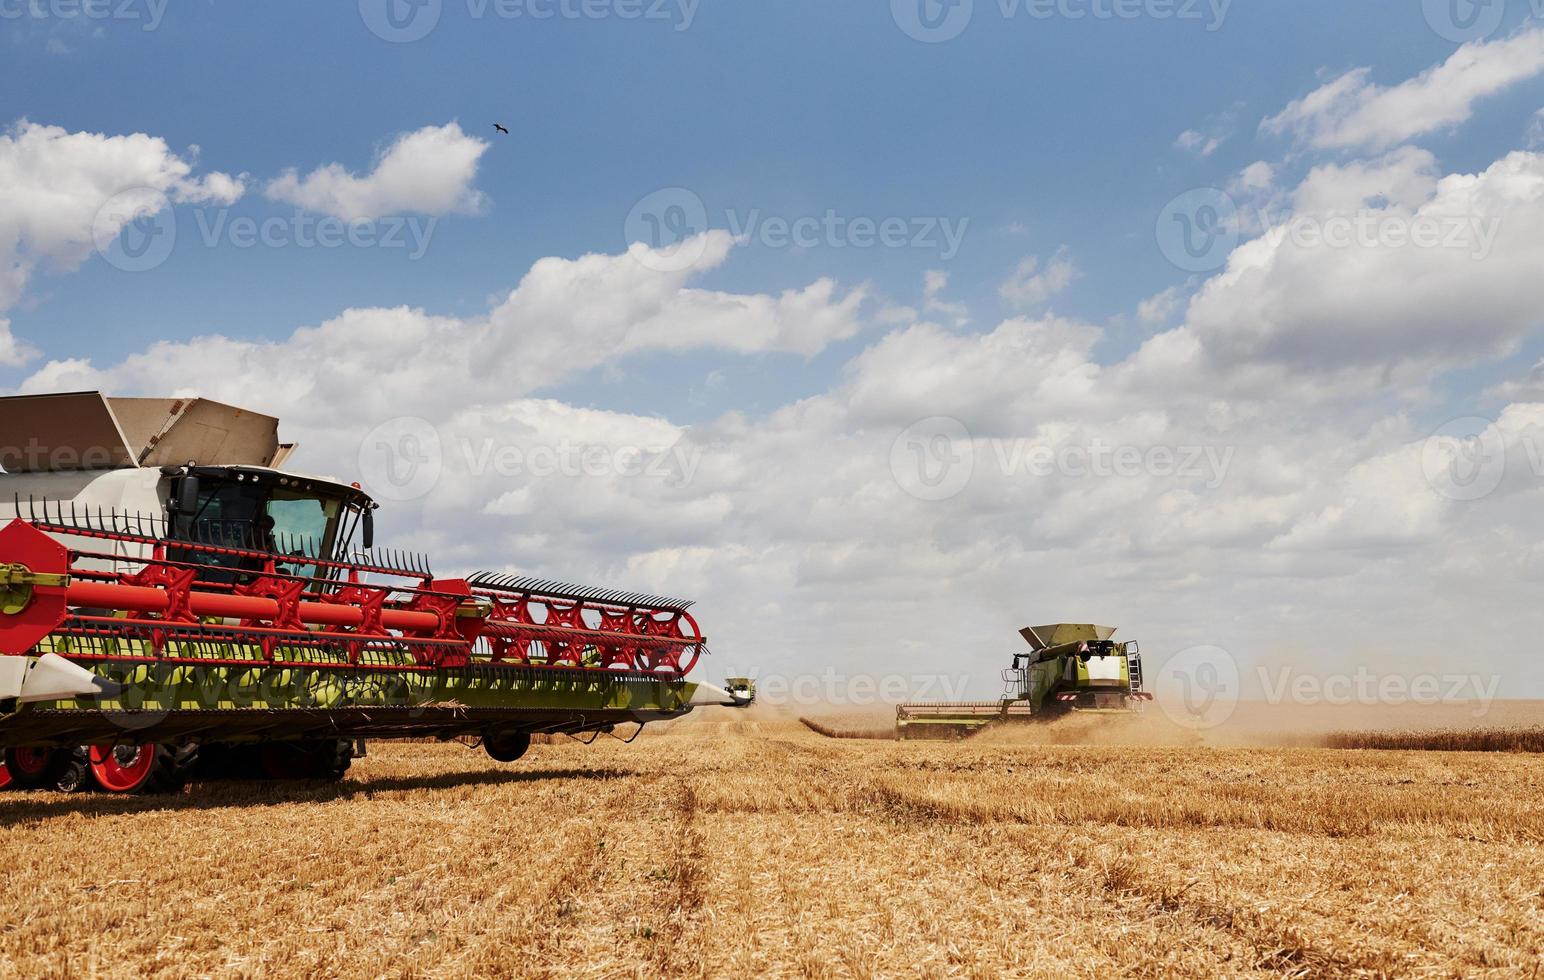 Large combine harvesters working in agriculturic field at summertime photo